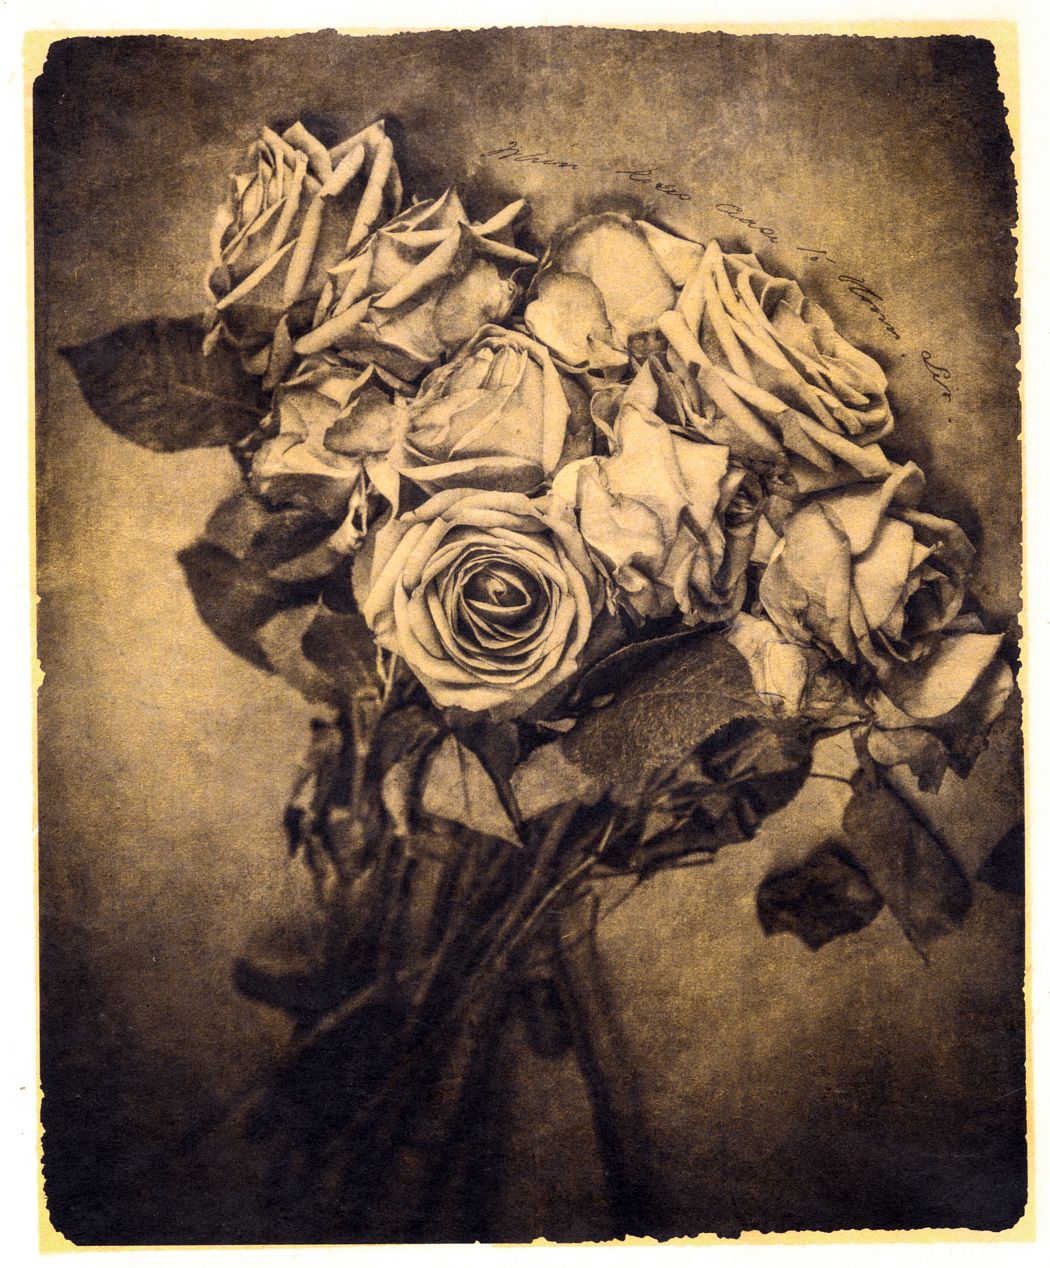 When roses cease to bloom sir, 2018